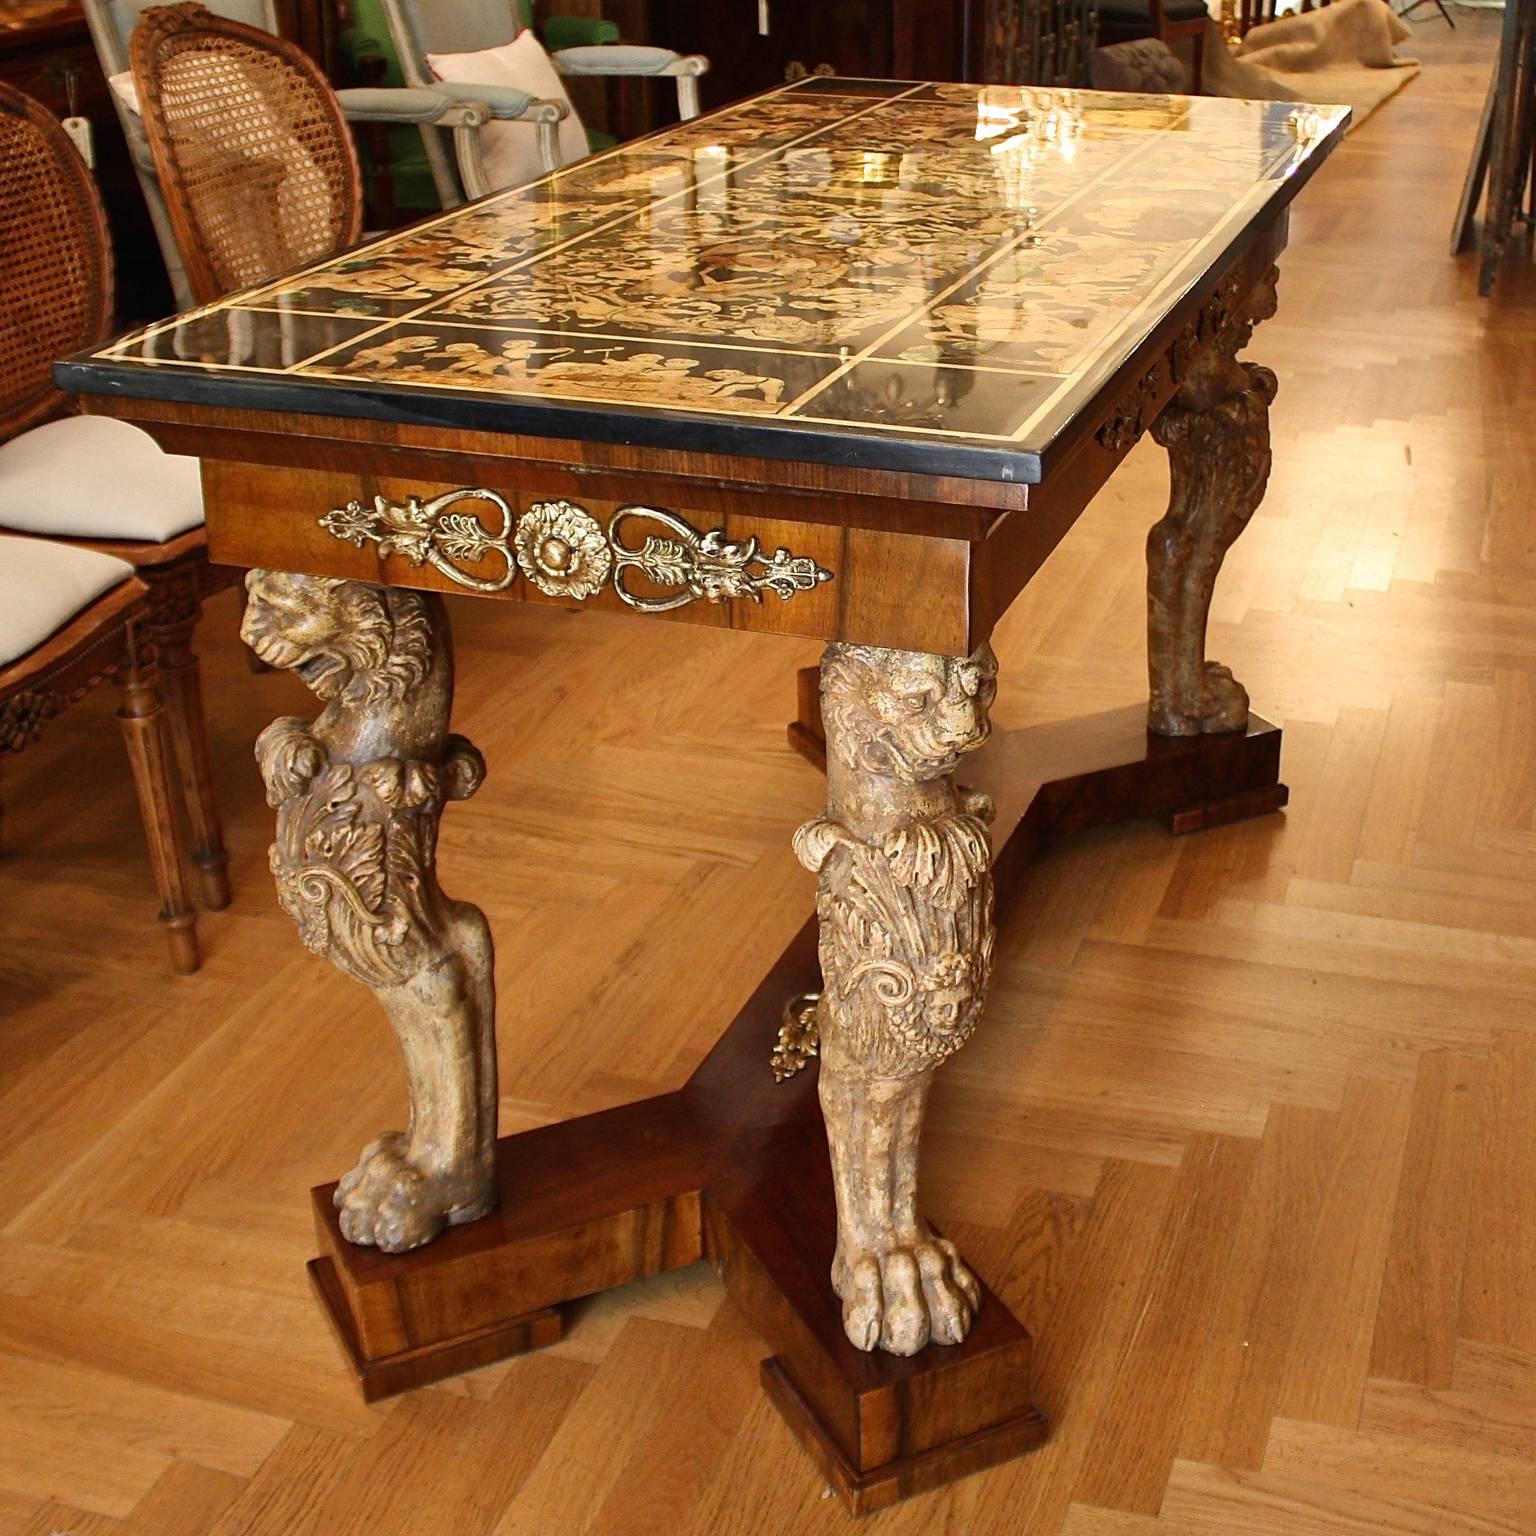 North Italian Center Table with Scagliola Top, dated 1721 4